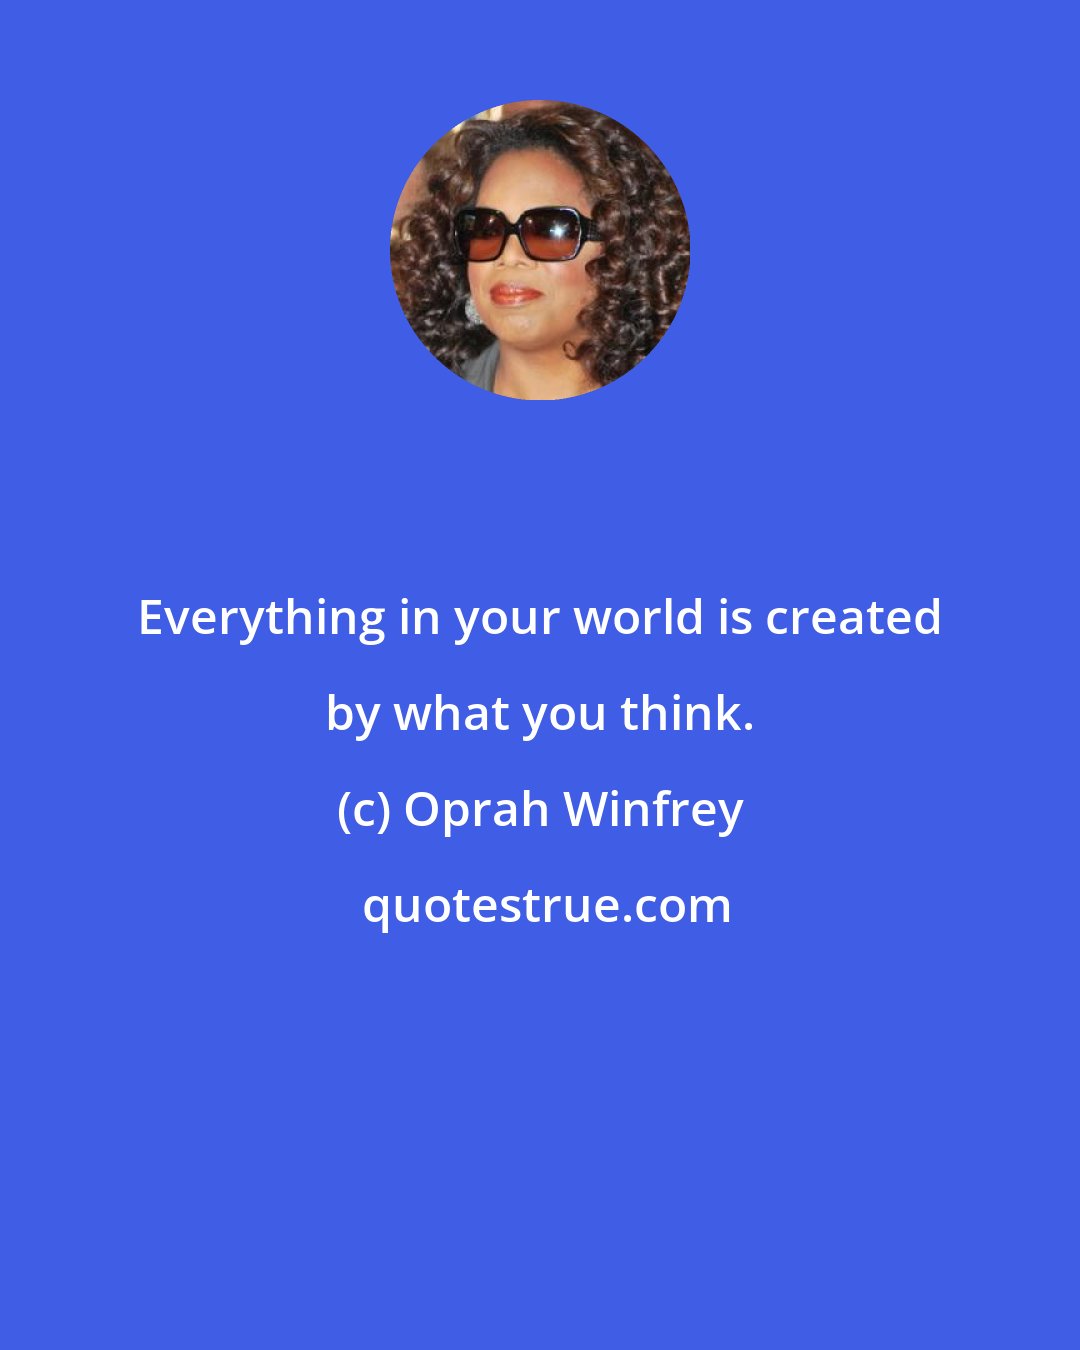 Oprah Winfrey: Everything in your world is created by what you think.